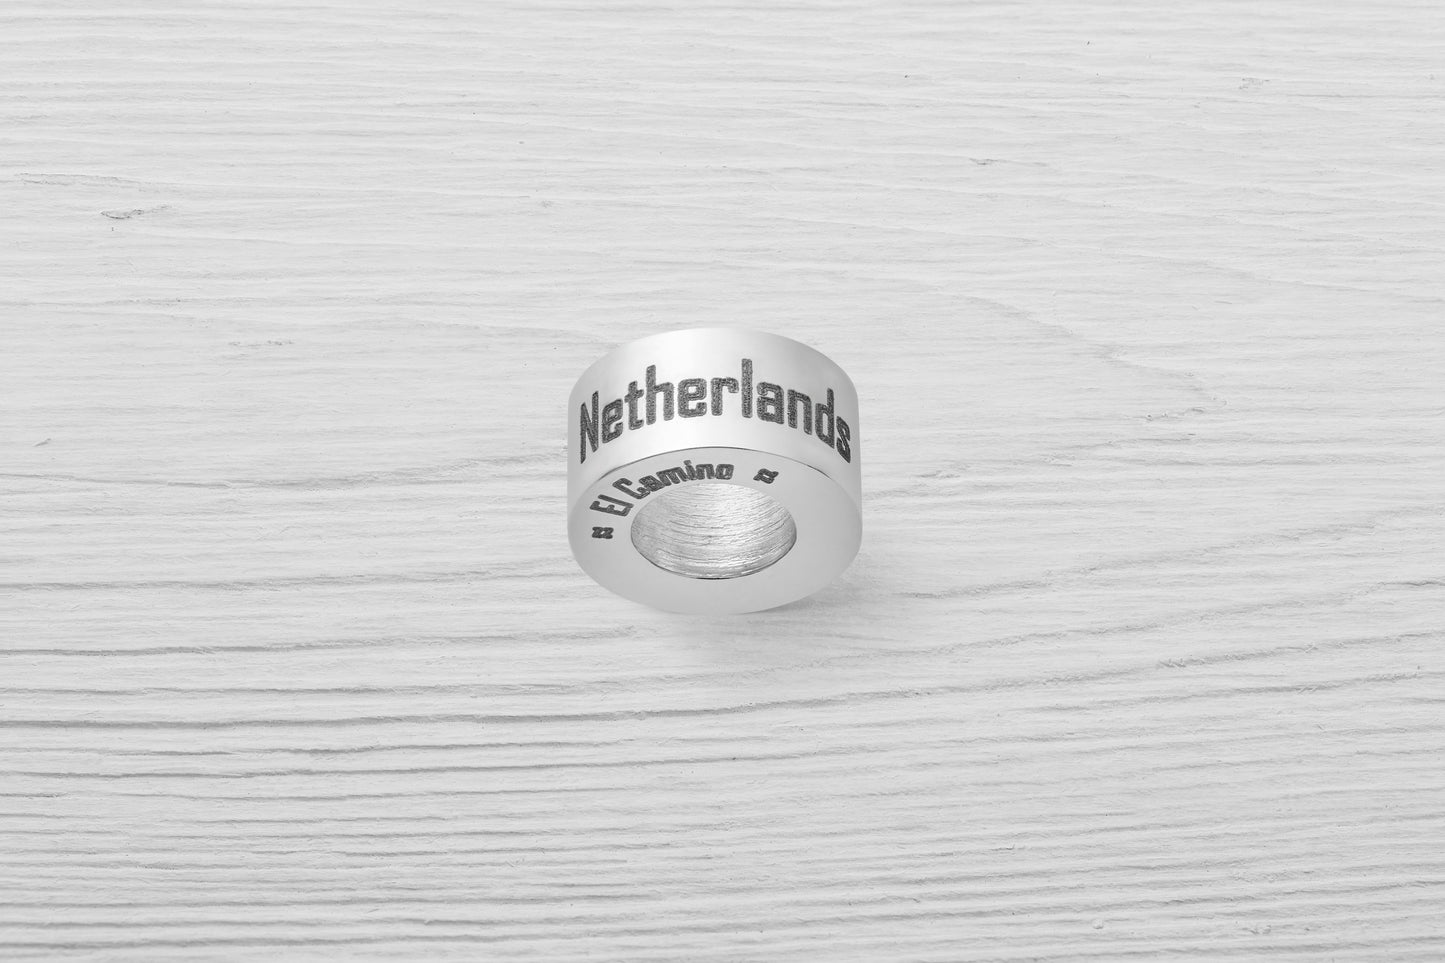 El Camino Netherlands Country Step Travel Charm Bead